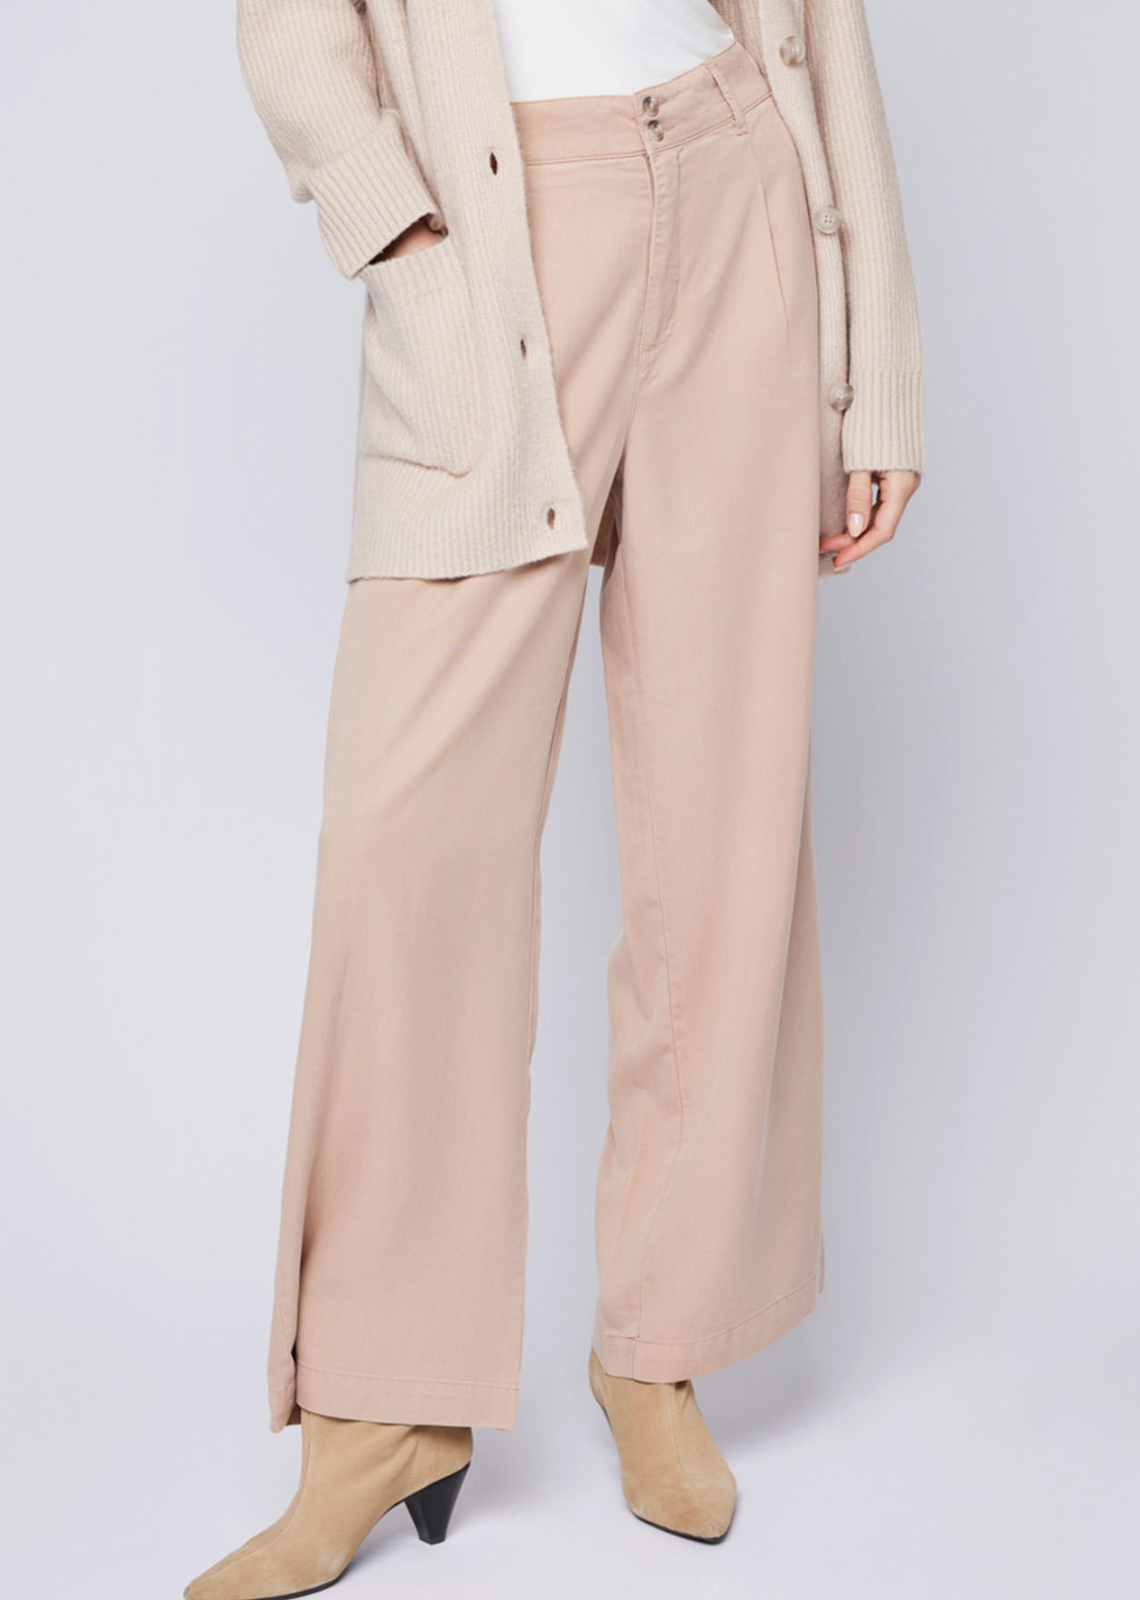 Jade By Jane Corduroy Flare Pants – My Pampered Life Seattle